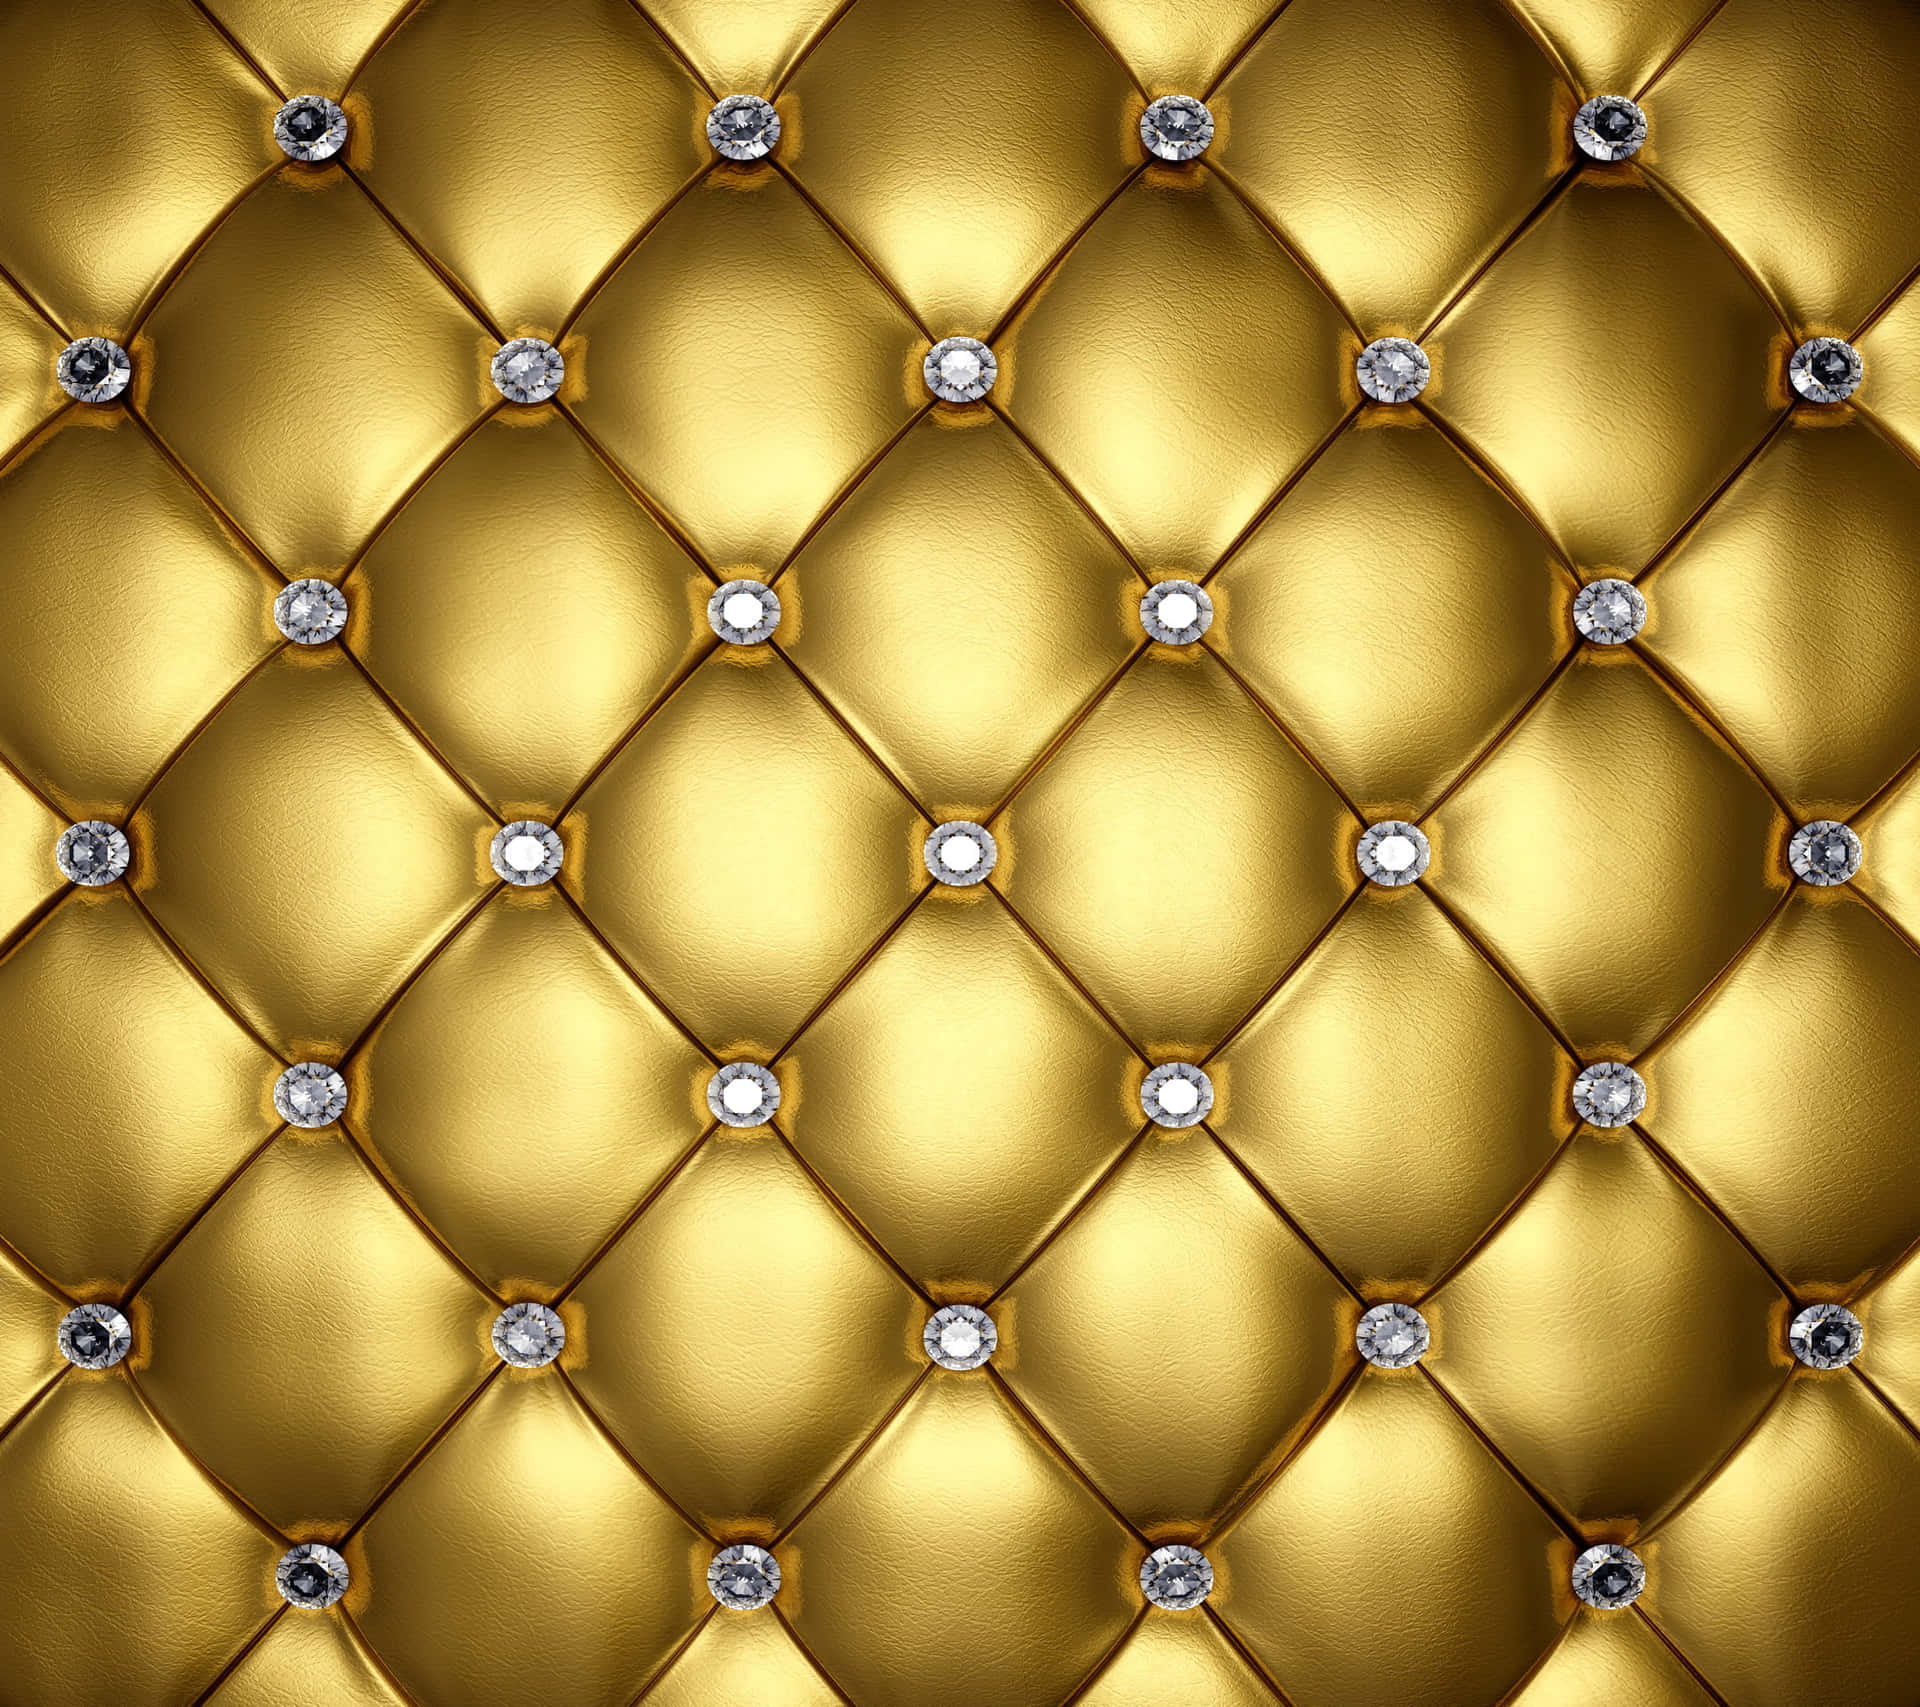 Golden Padding Patterns With Jewels Background